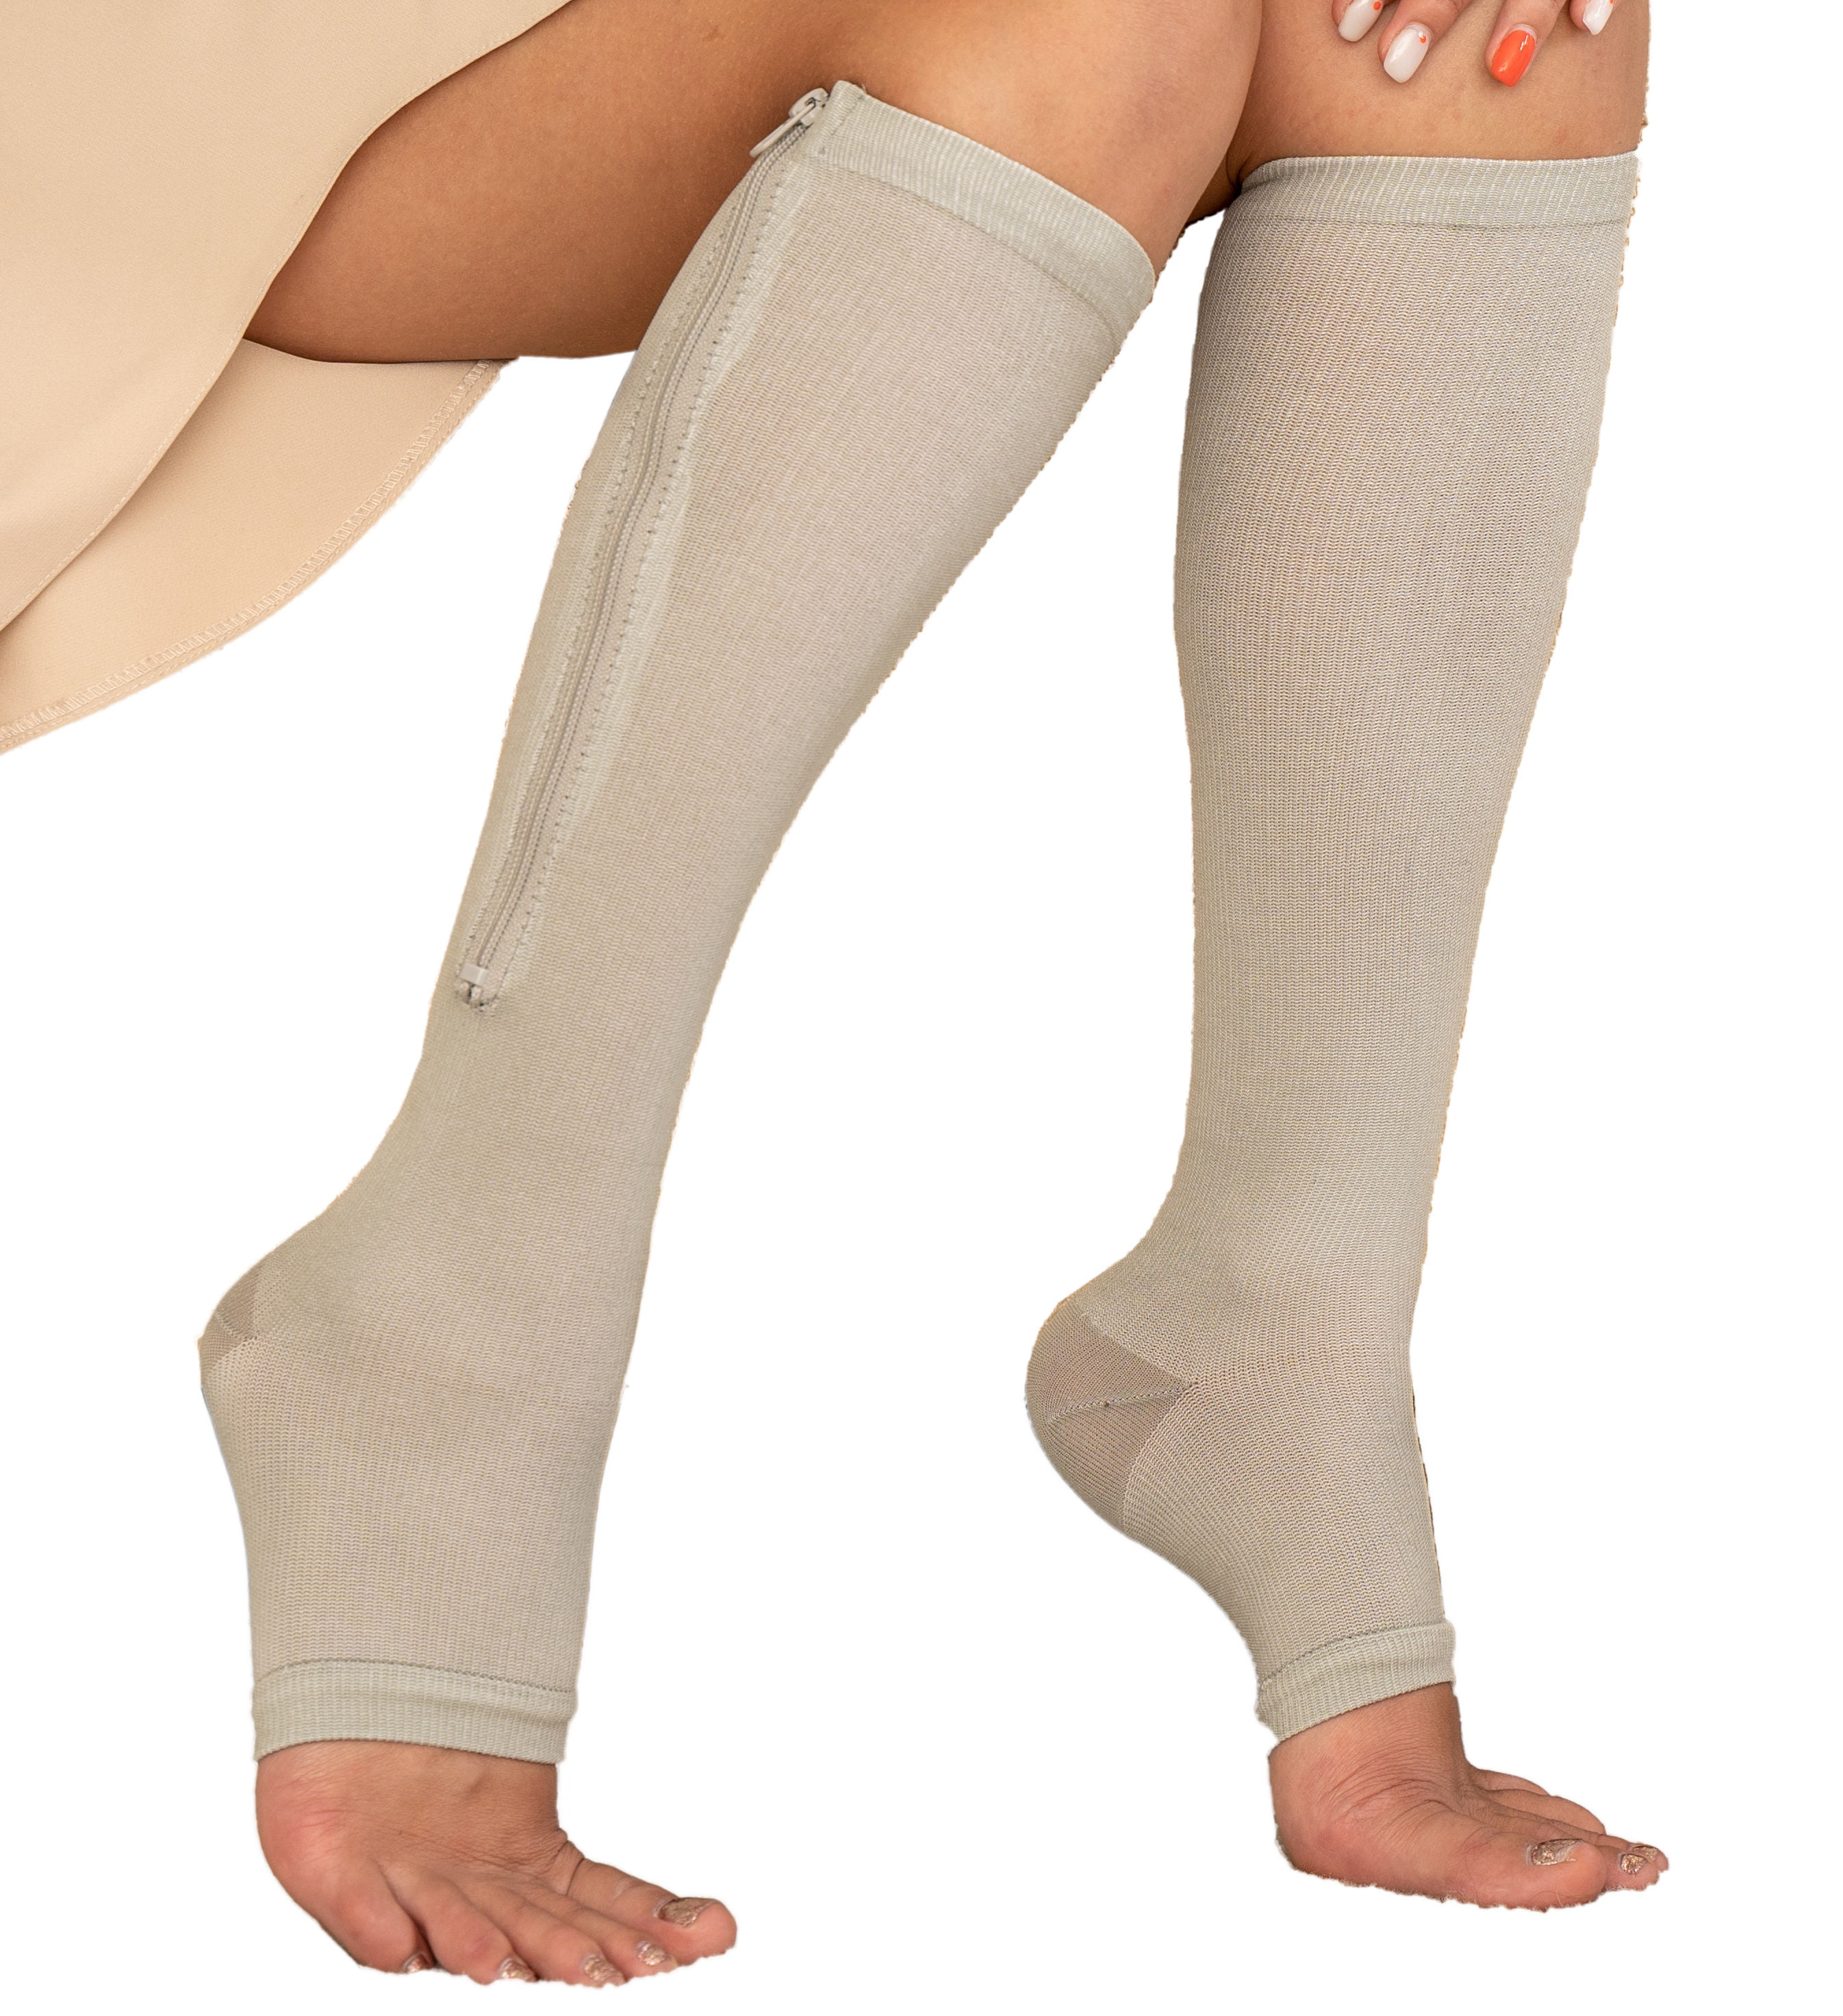 Compression Leggings Or Socks  International Society of Precision  Agriculture